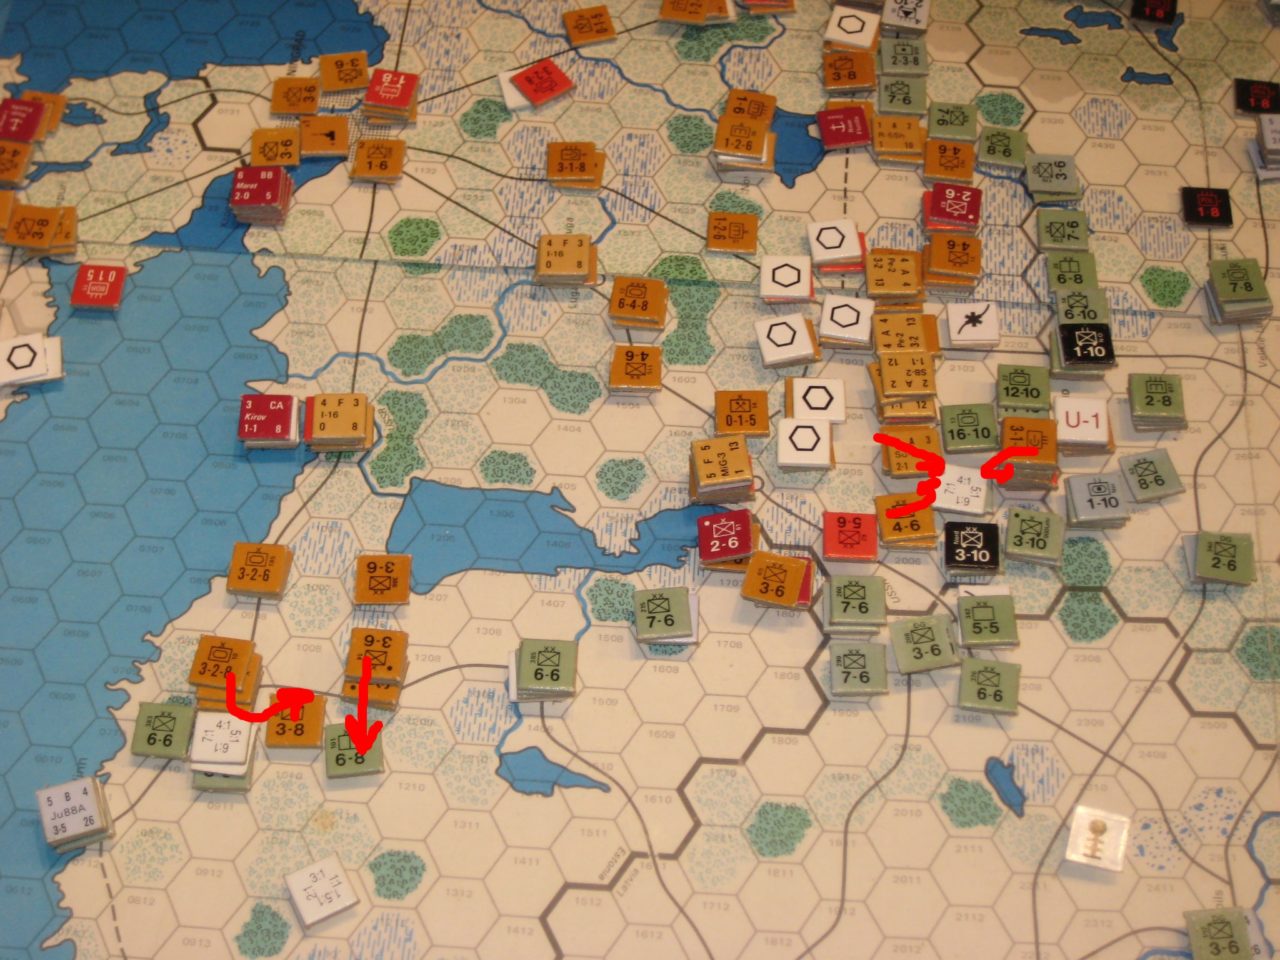 MAY I '42: Failed breakout of encircled Soviet troops in the North